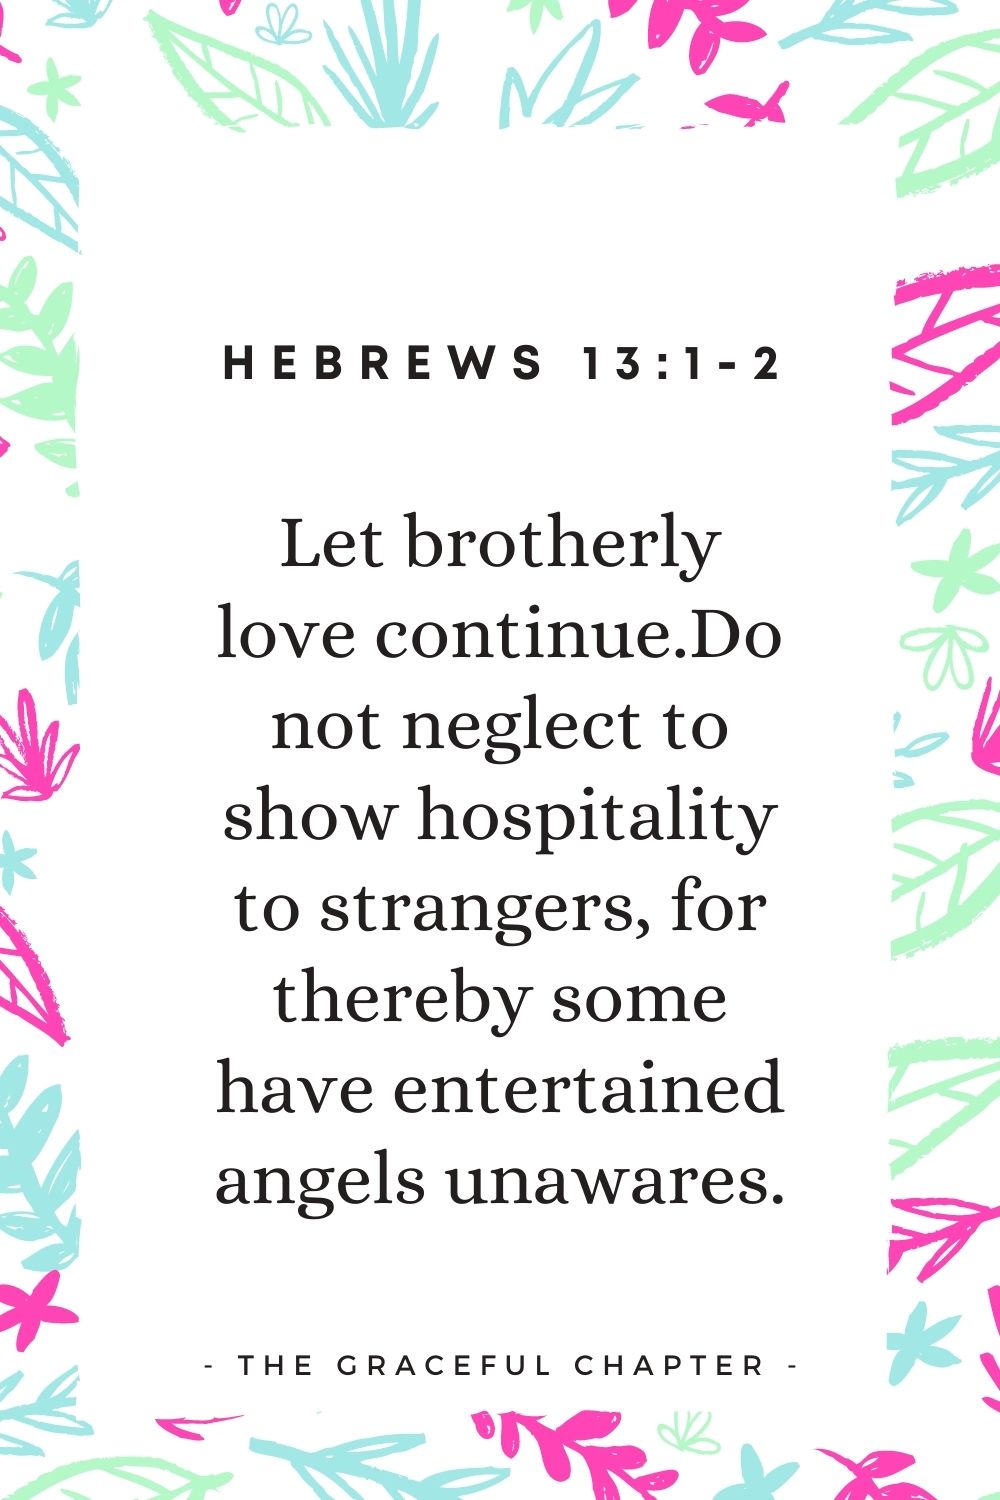 Let brotherly love continue. Do not neglect to show hospitality to strangers, for thereby some have entertained angels unawares. Hebrews 13:1-2